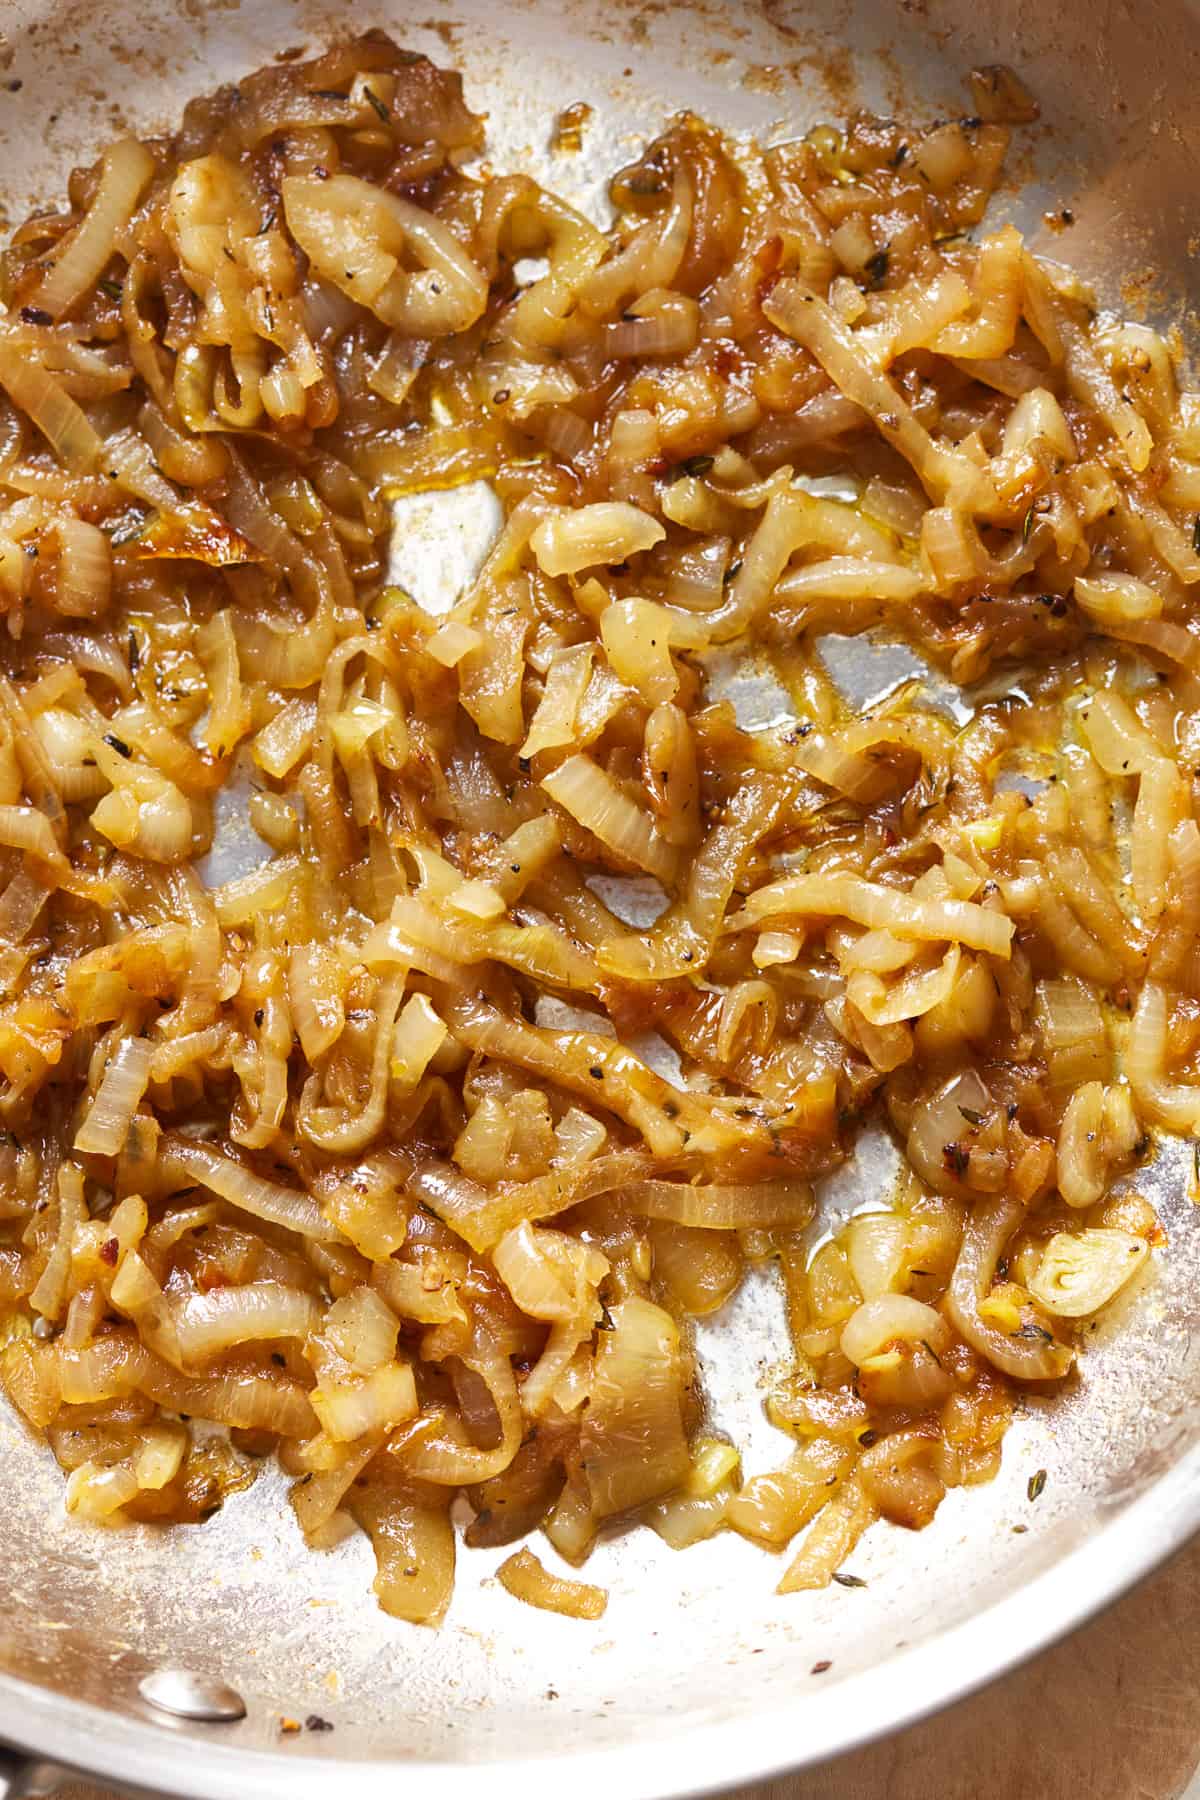 https://www.thecookierookie.com/wp-content/uploads/2023/02/how-to-caramelize-onions-recipe-4.jpg